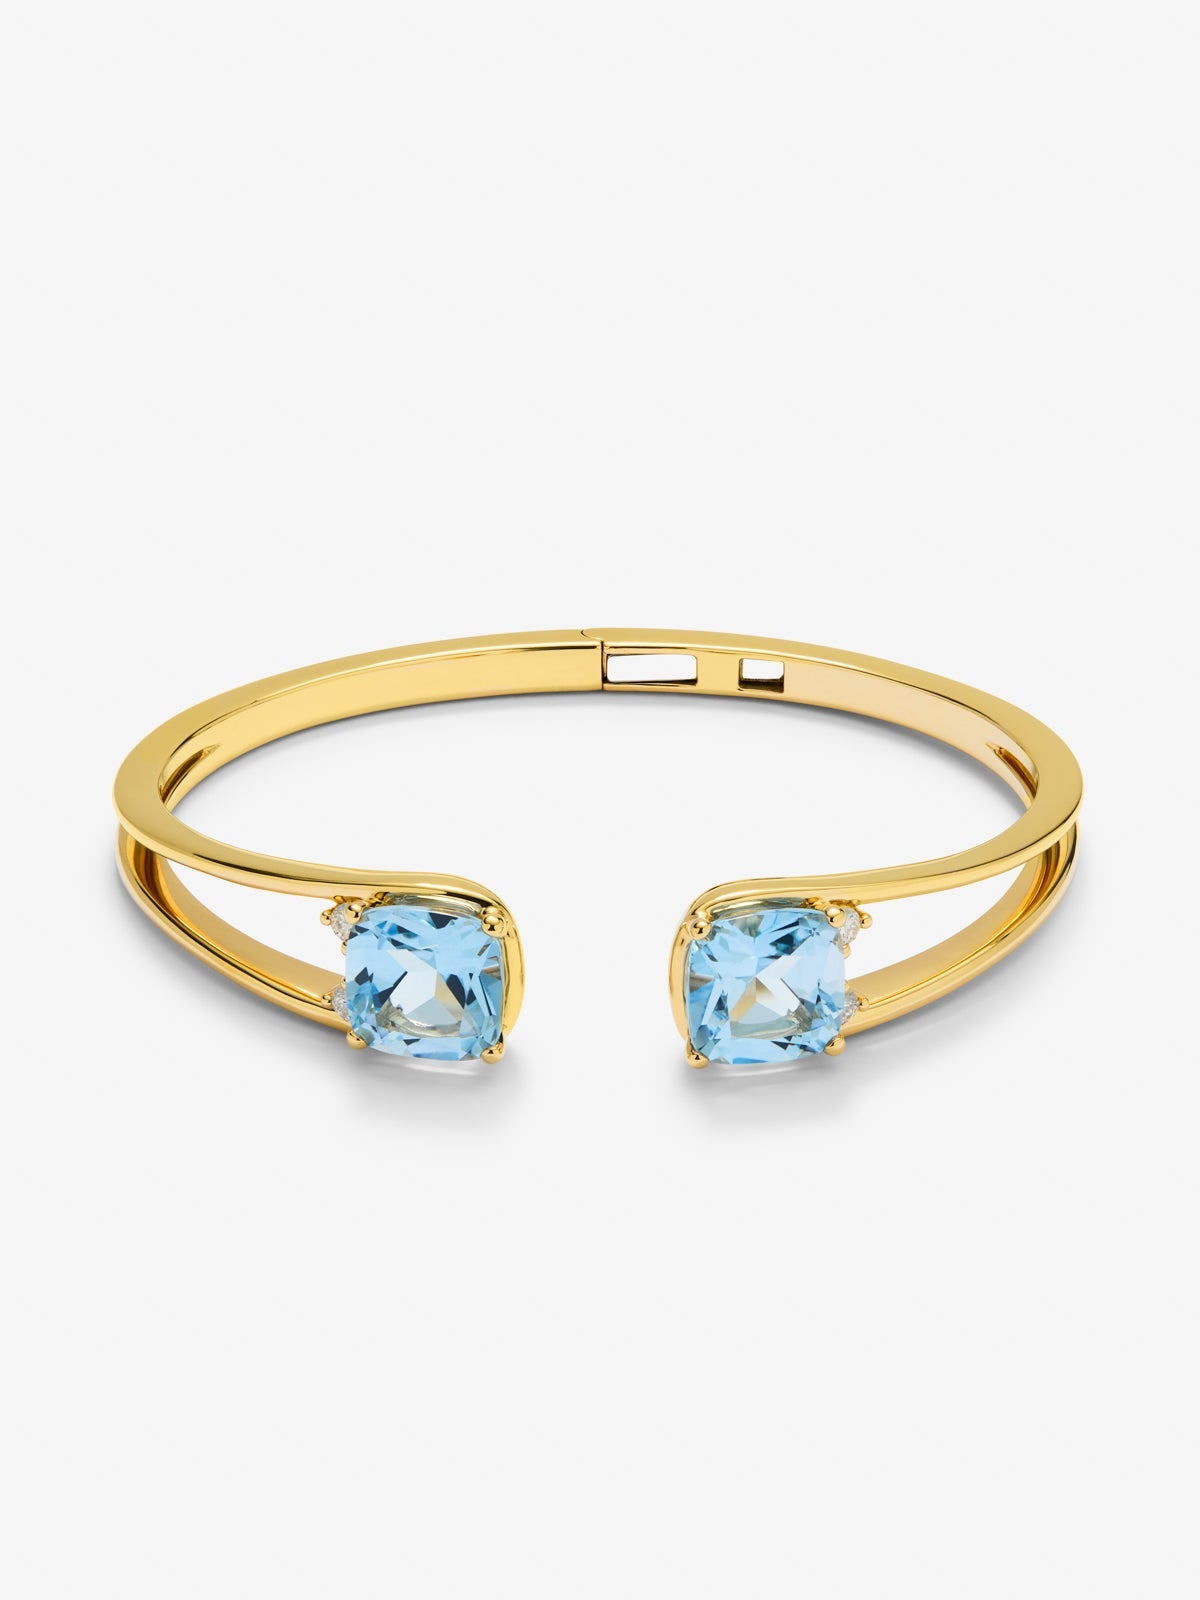 Rigid 18K yellow gold bracelet with 2 sky blue topazes in cushion cut with a total of 0.12 cts